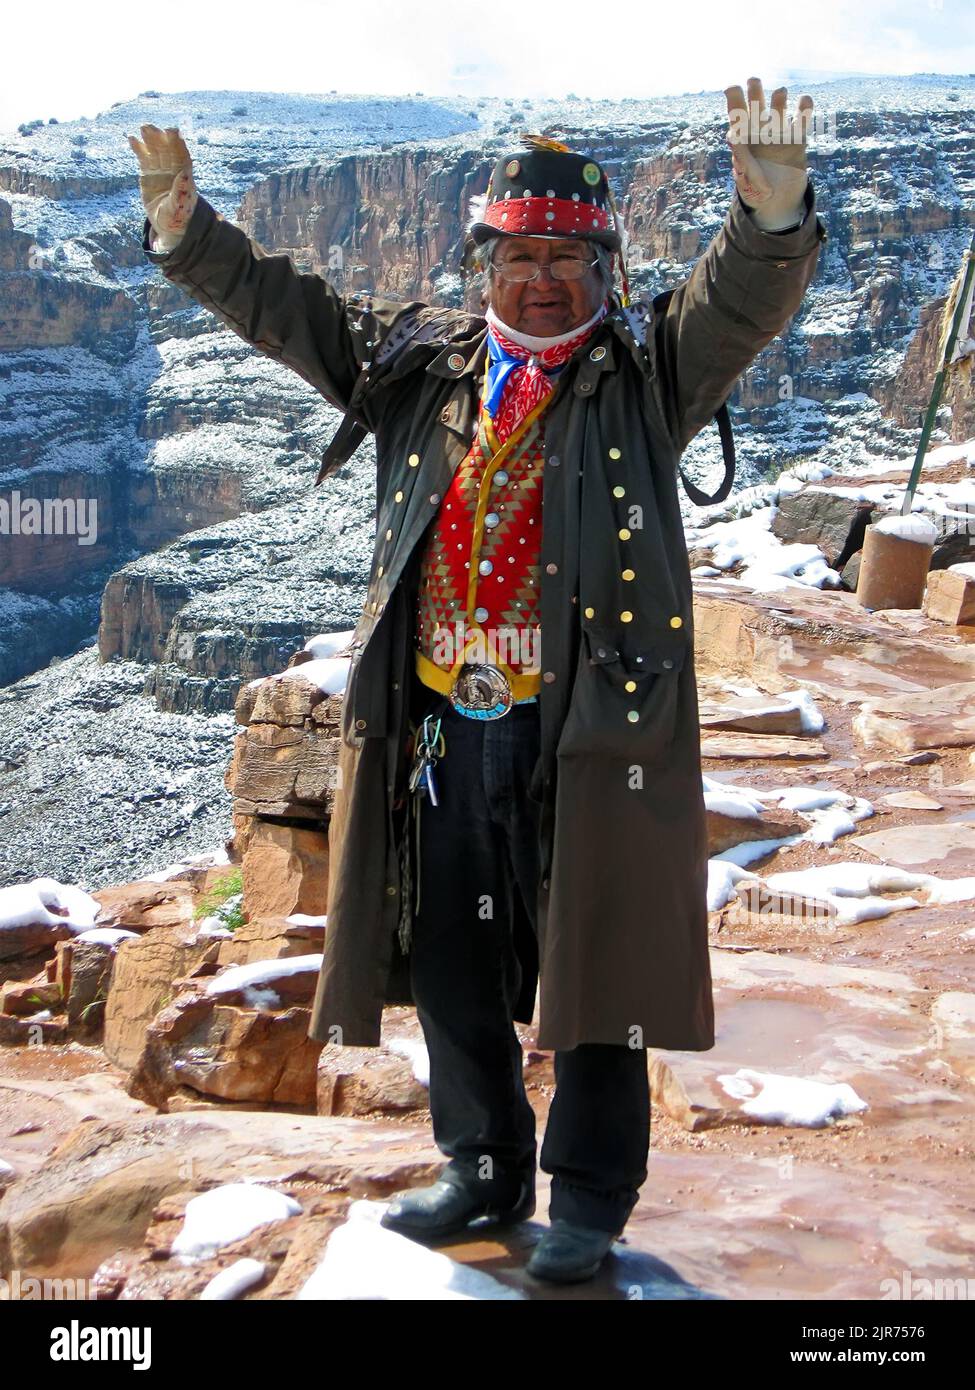 single indian in national suite and hat in Grand Canyon send welcome to visitors in Arizona, USA. Stock Photo